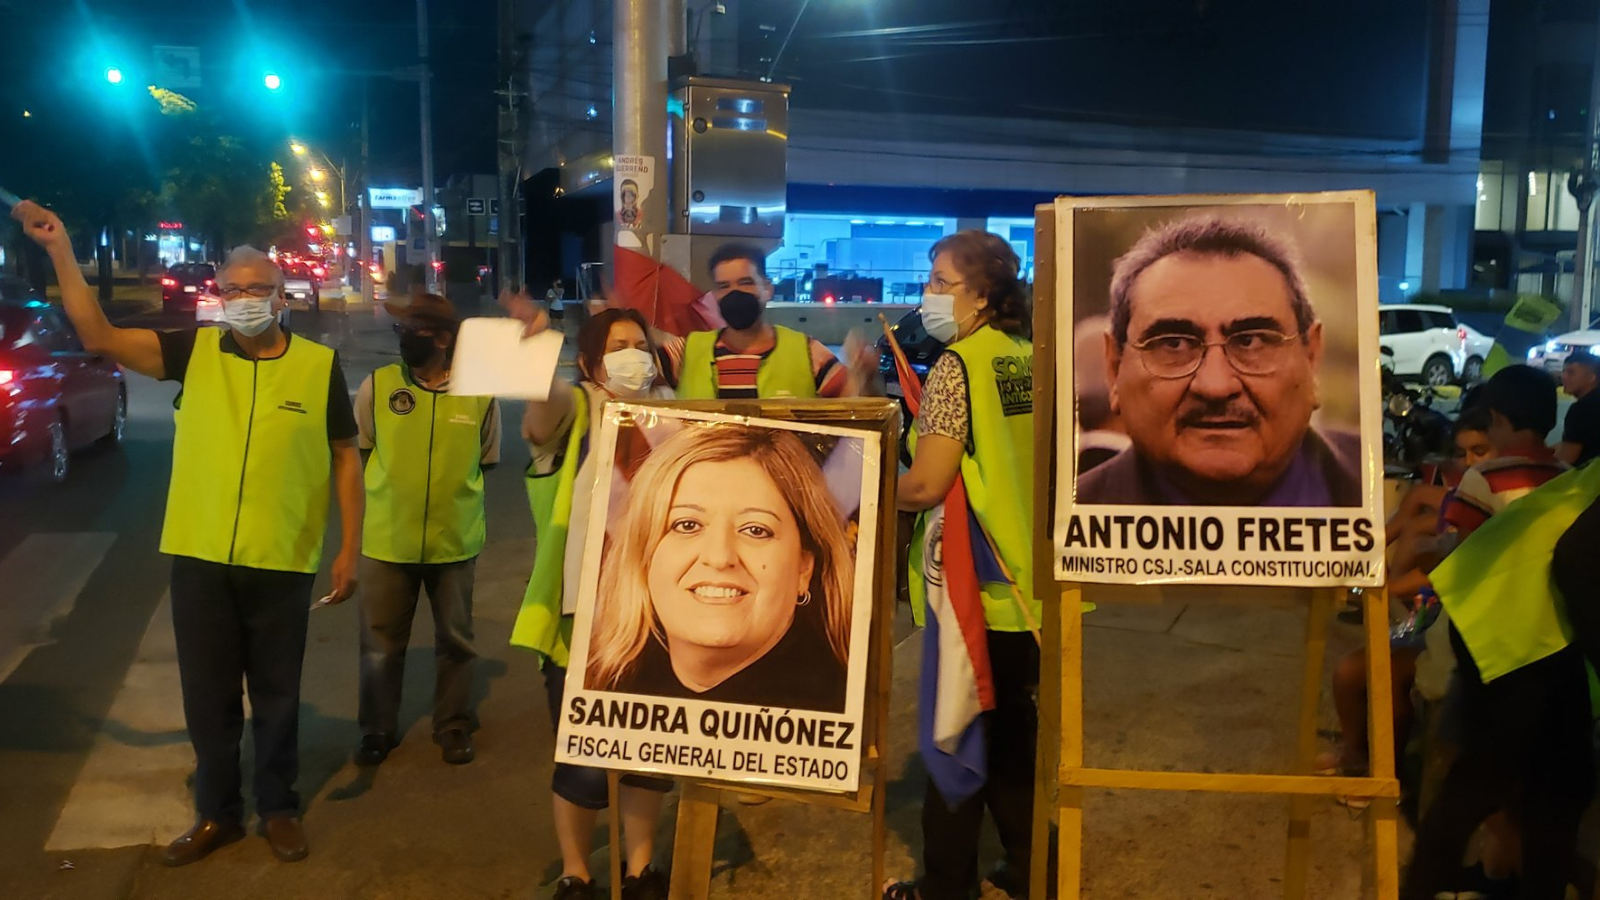 “We are fed up”, they demand the resignation of Quiñónez